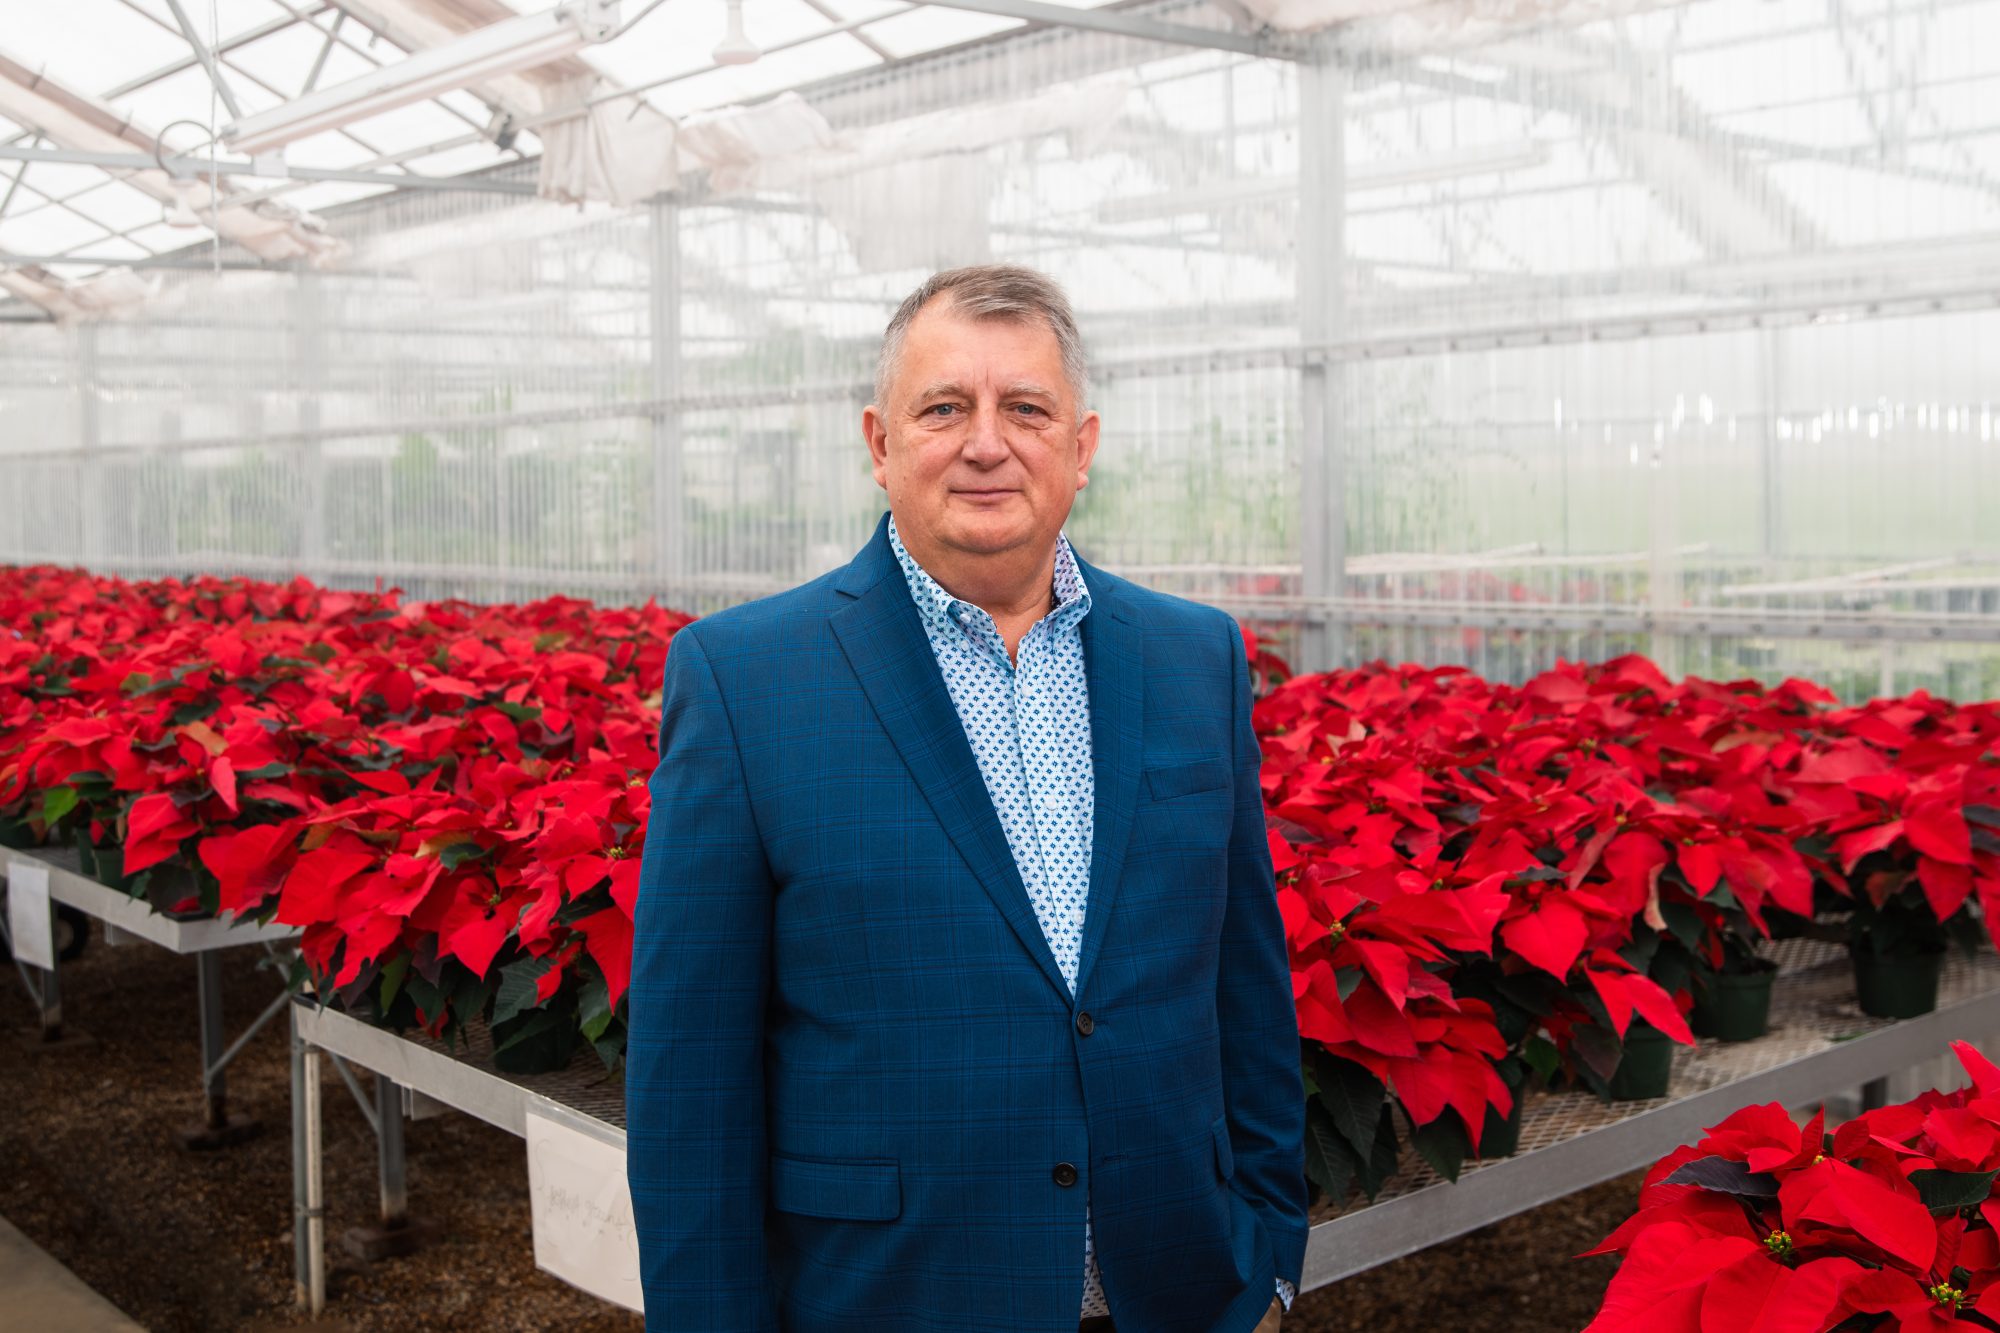 A person stands in and indoor greenhouse full of red and white plants.